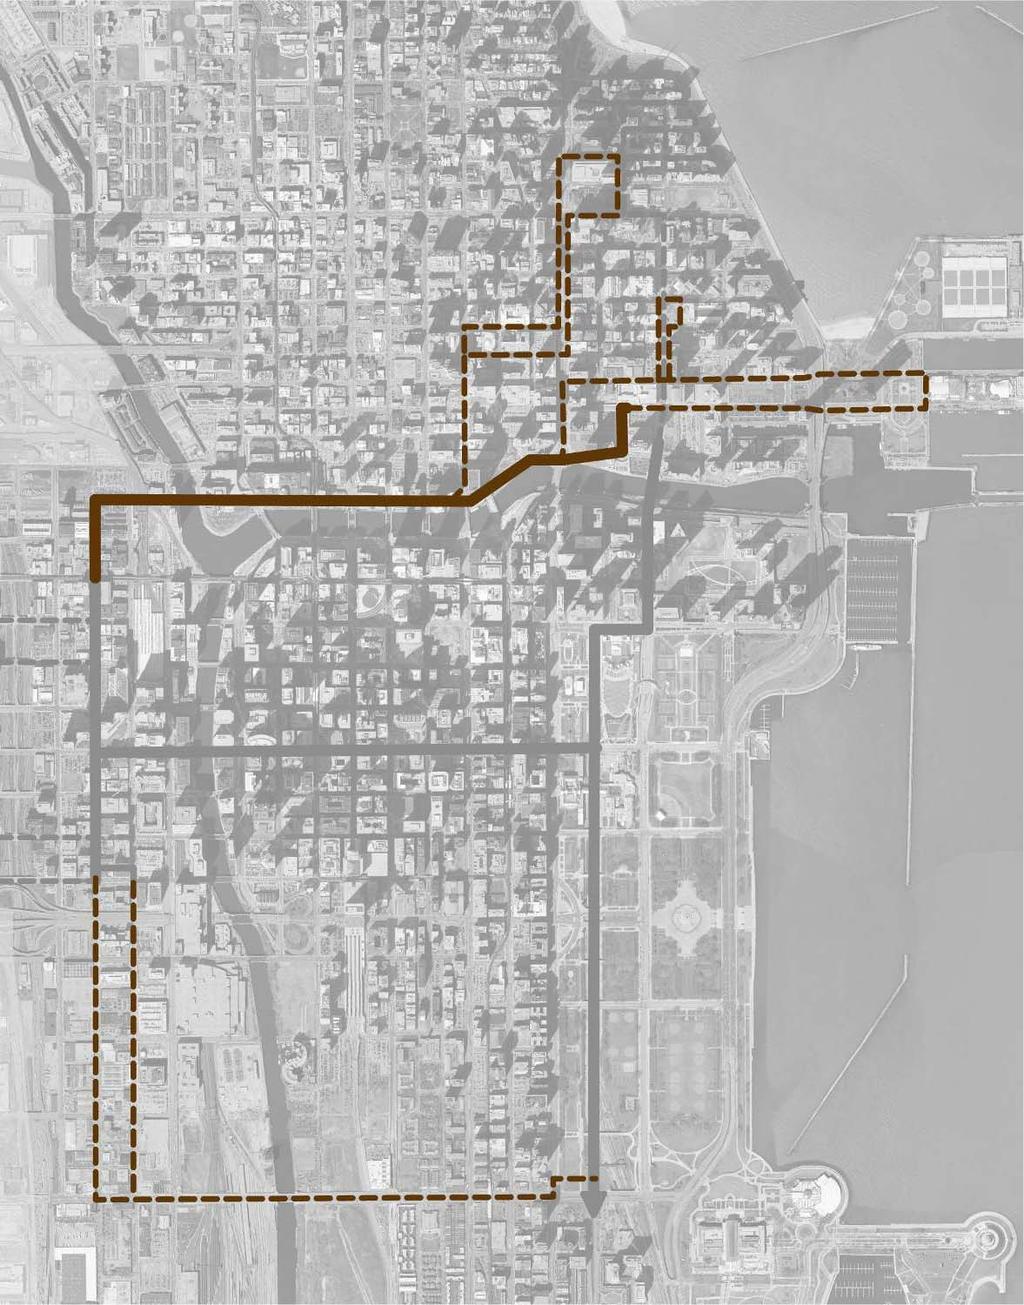 Carroll Ave Transitway City Role: Lead Timeframe: 2008 2012 Cost Estimate: $260M Potential Funding